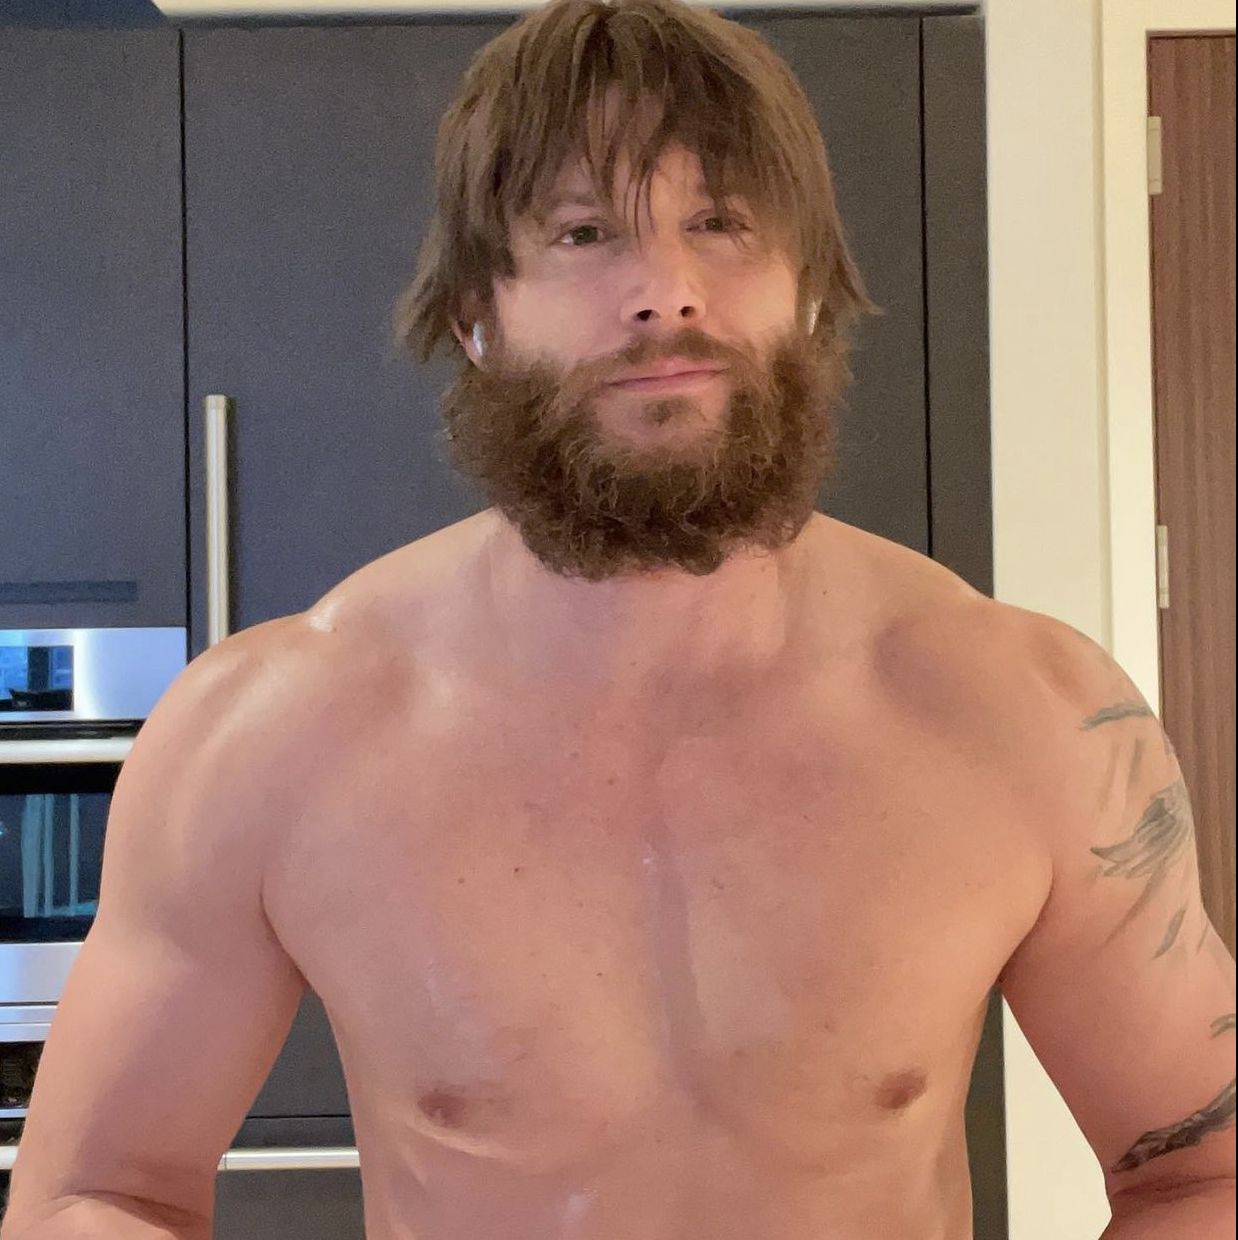 Jensen Ackles Is Bearded and Buff in New Shirtless Photo Ahead of His 'The Boys' Debut